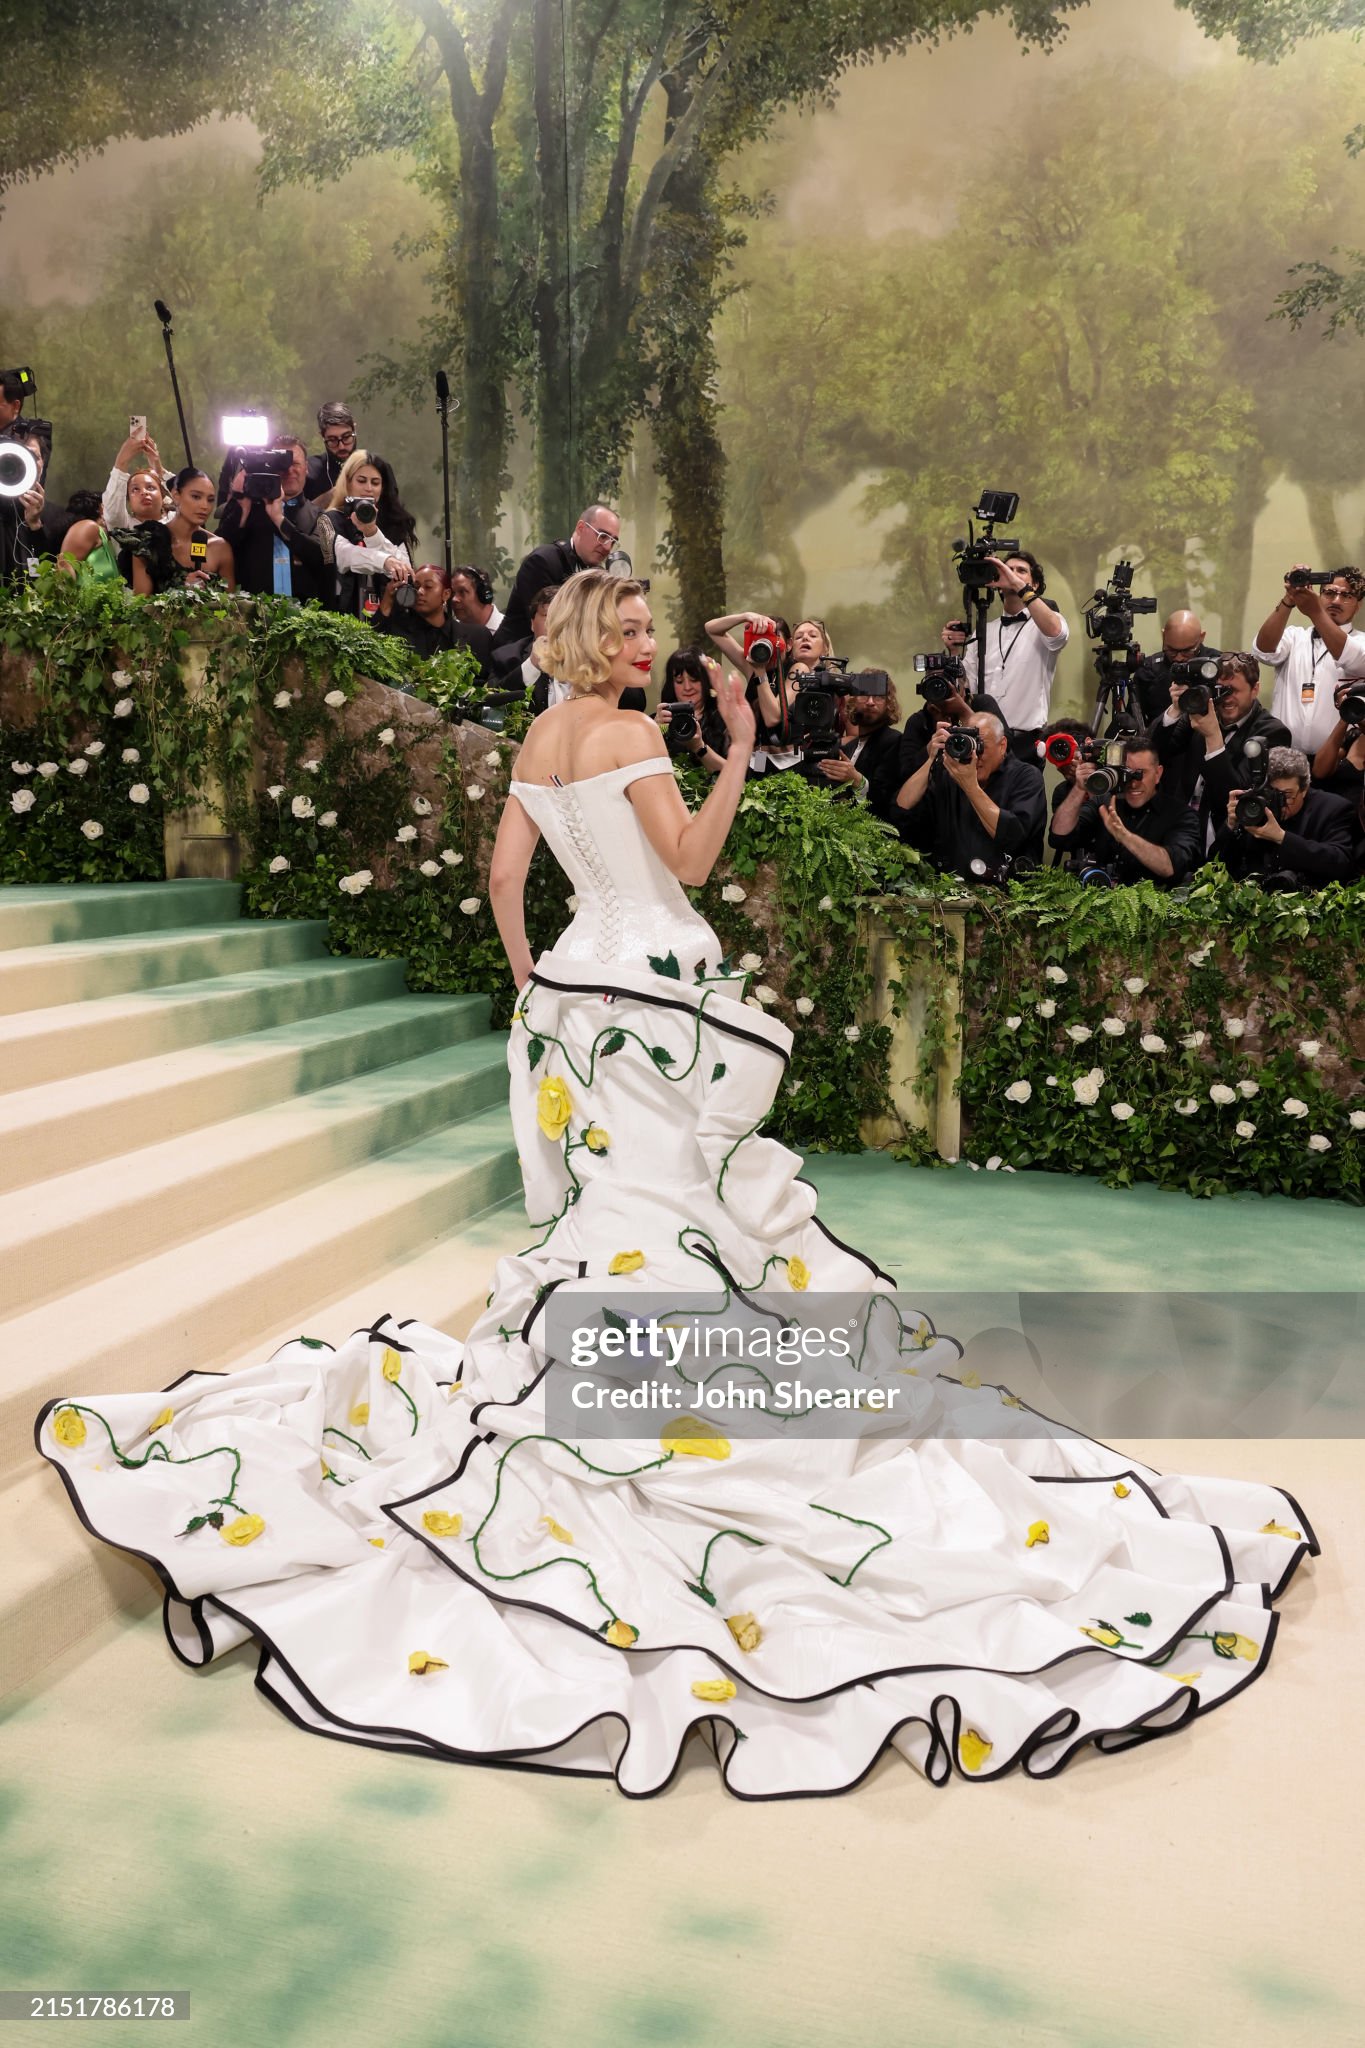 gettyimages-2151786178-2048x2048.jpg